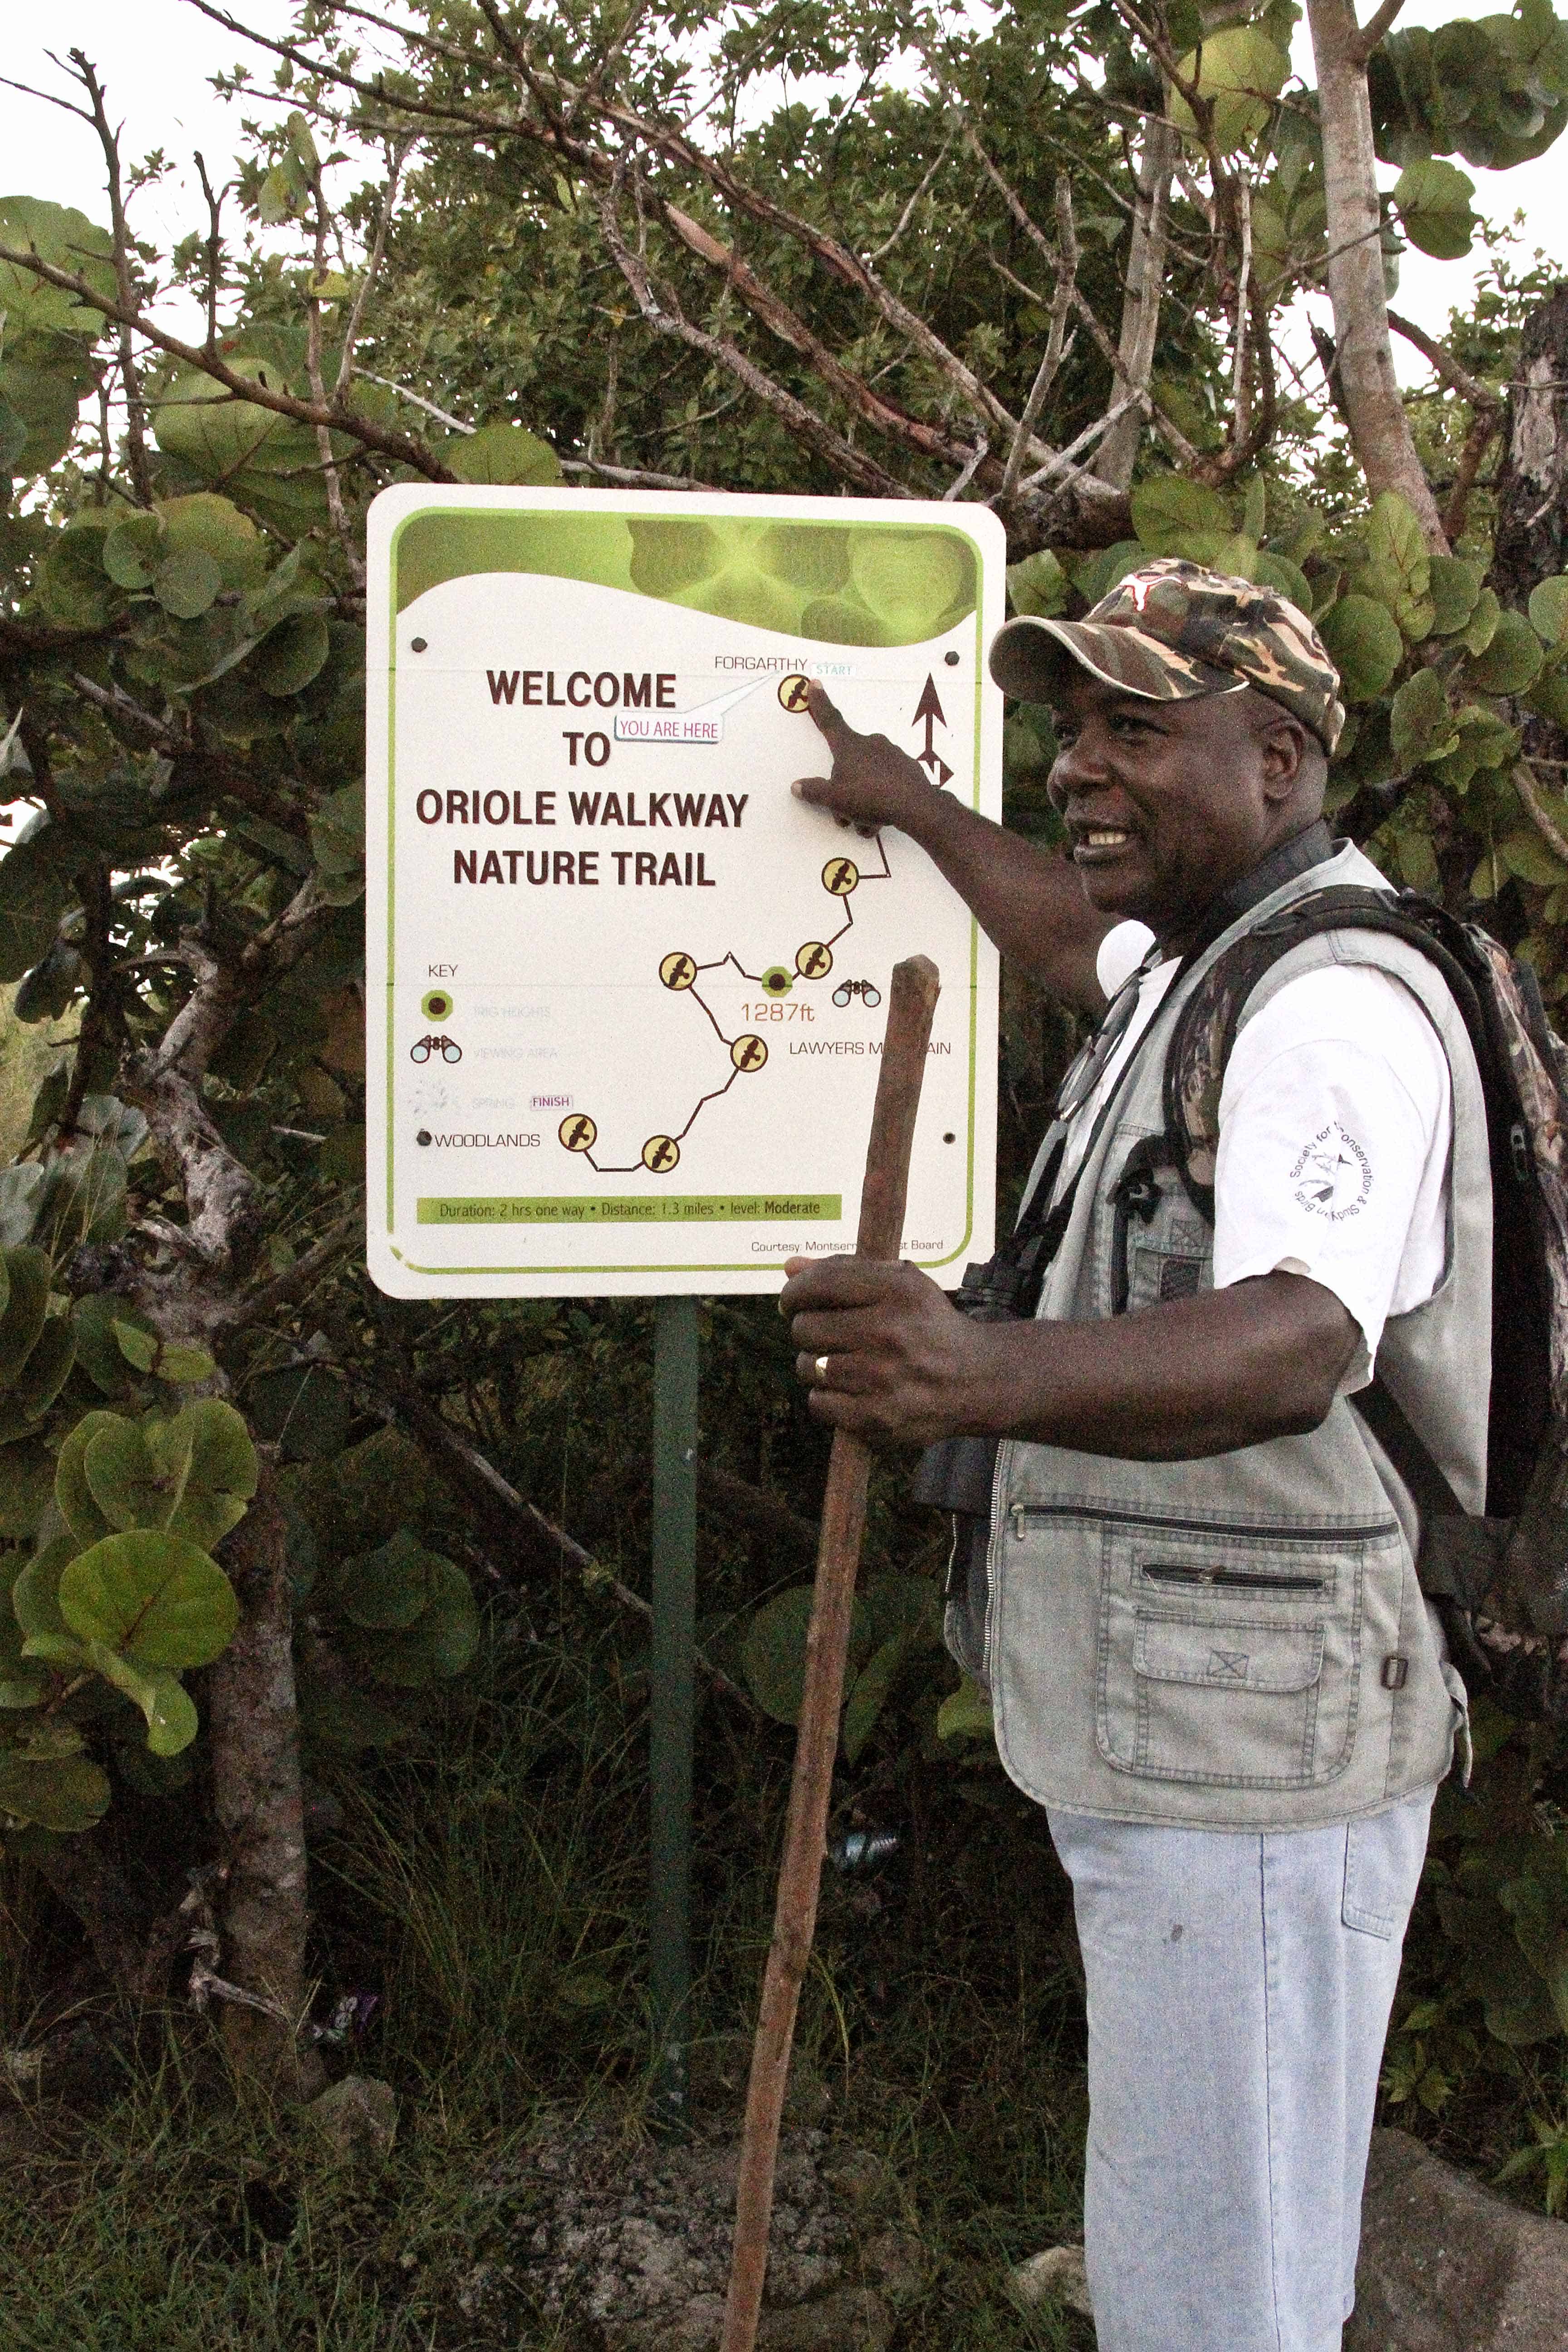 Local wildlife expert and guide, James 'Scriber' Daley at the start of one of the forest trails, for which he also supervises maintenance. Copyright: Dr Mike Pienkowski